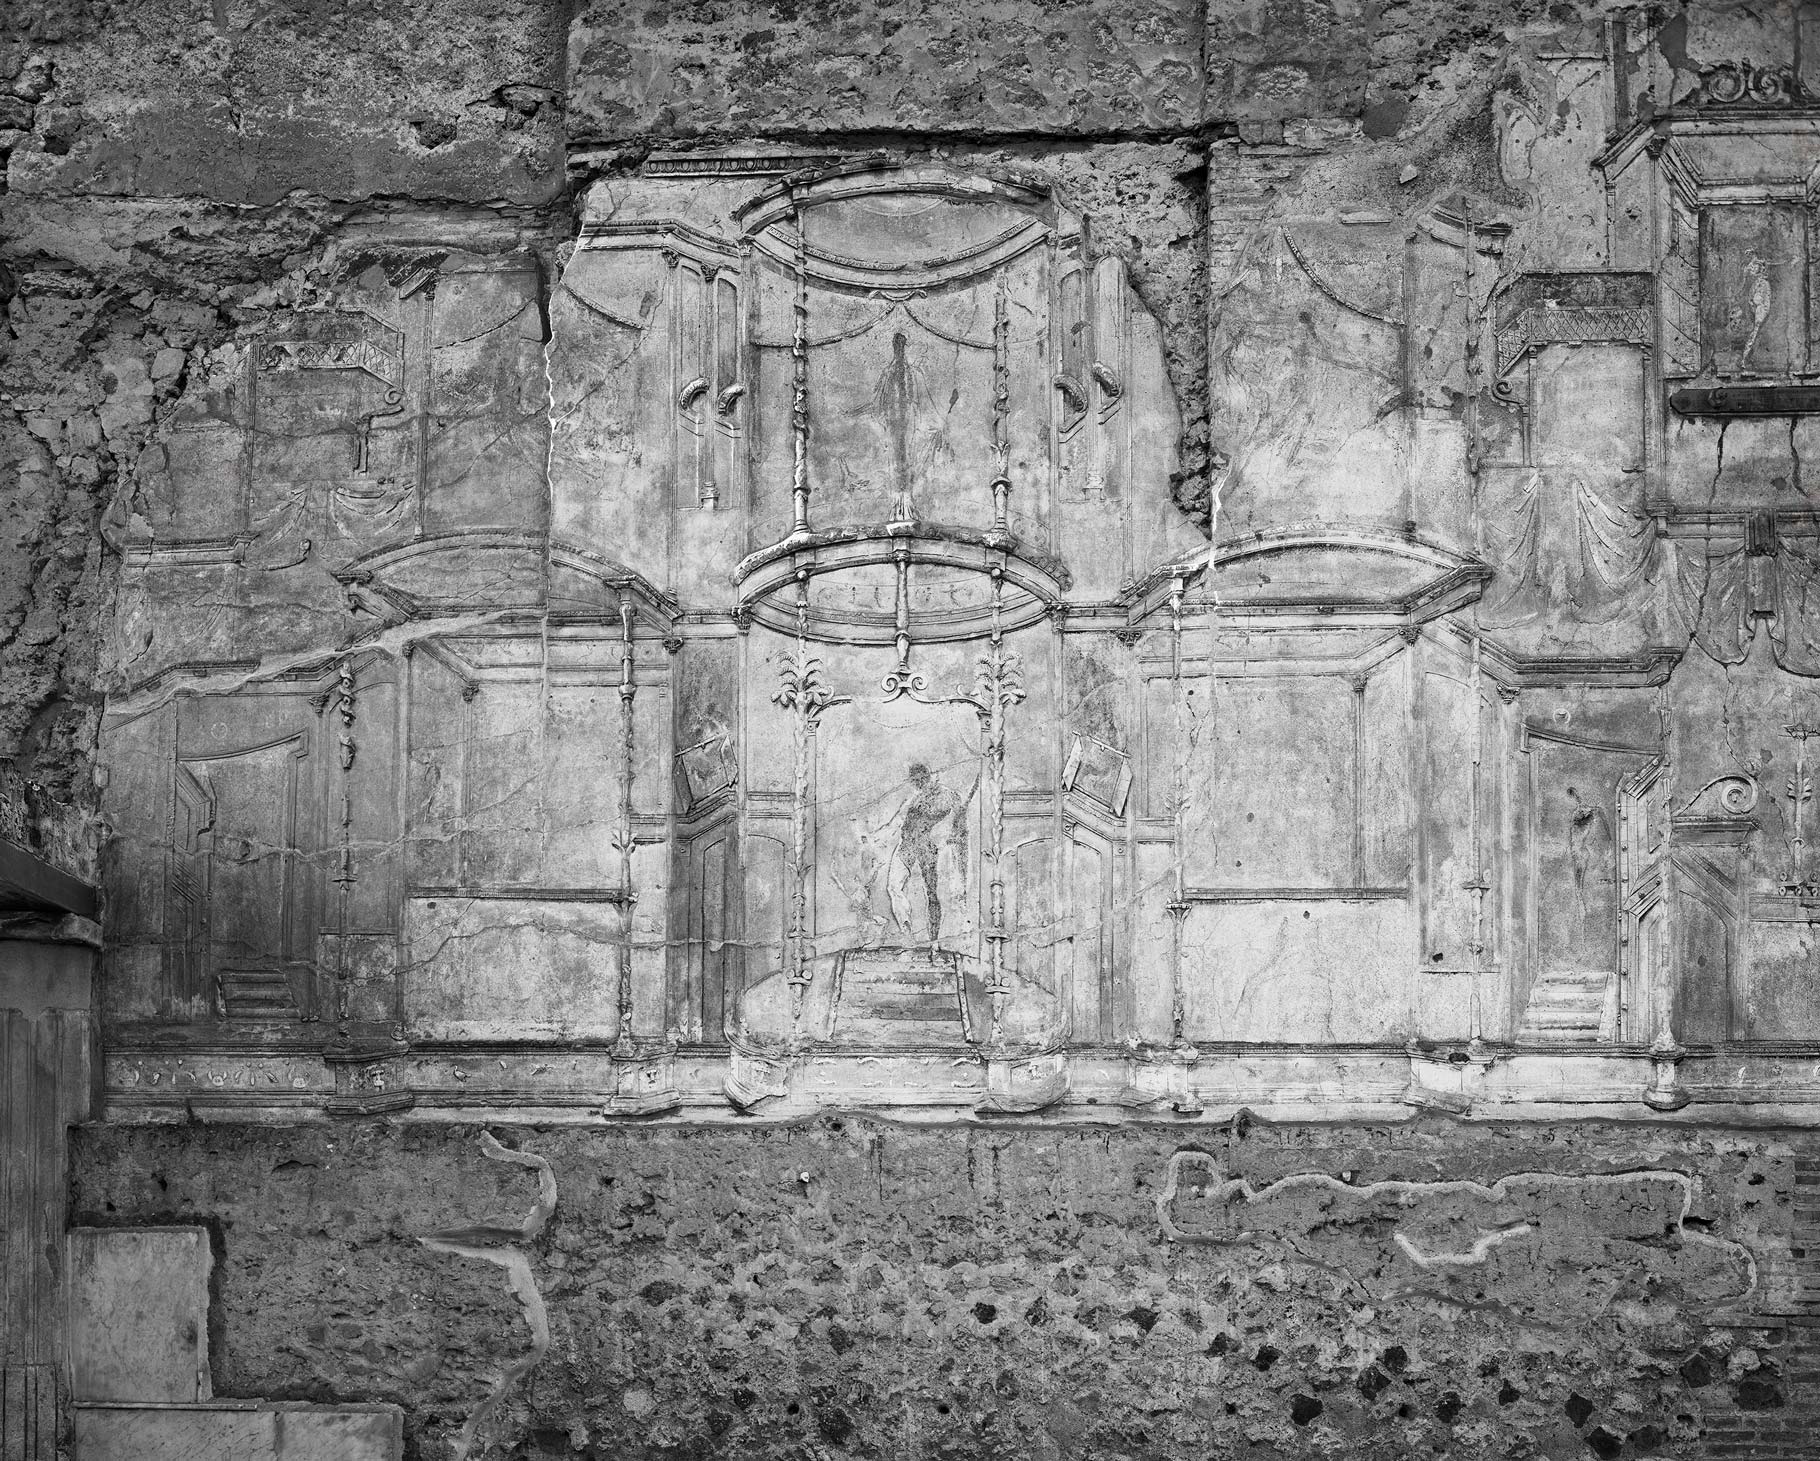 Carved wall in pompeii, black and white image